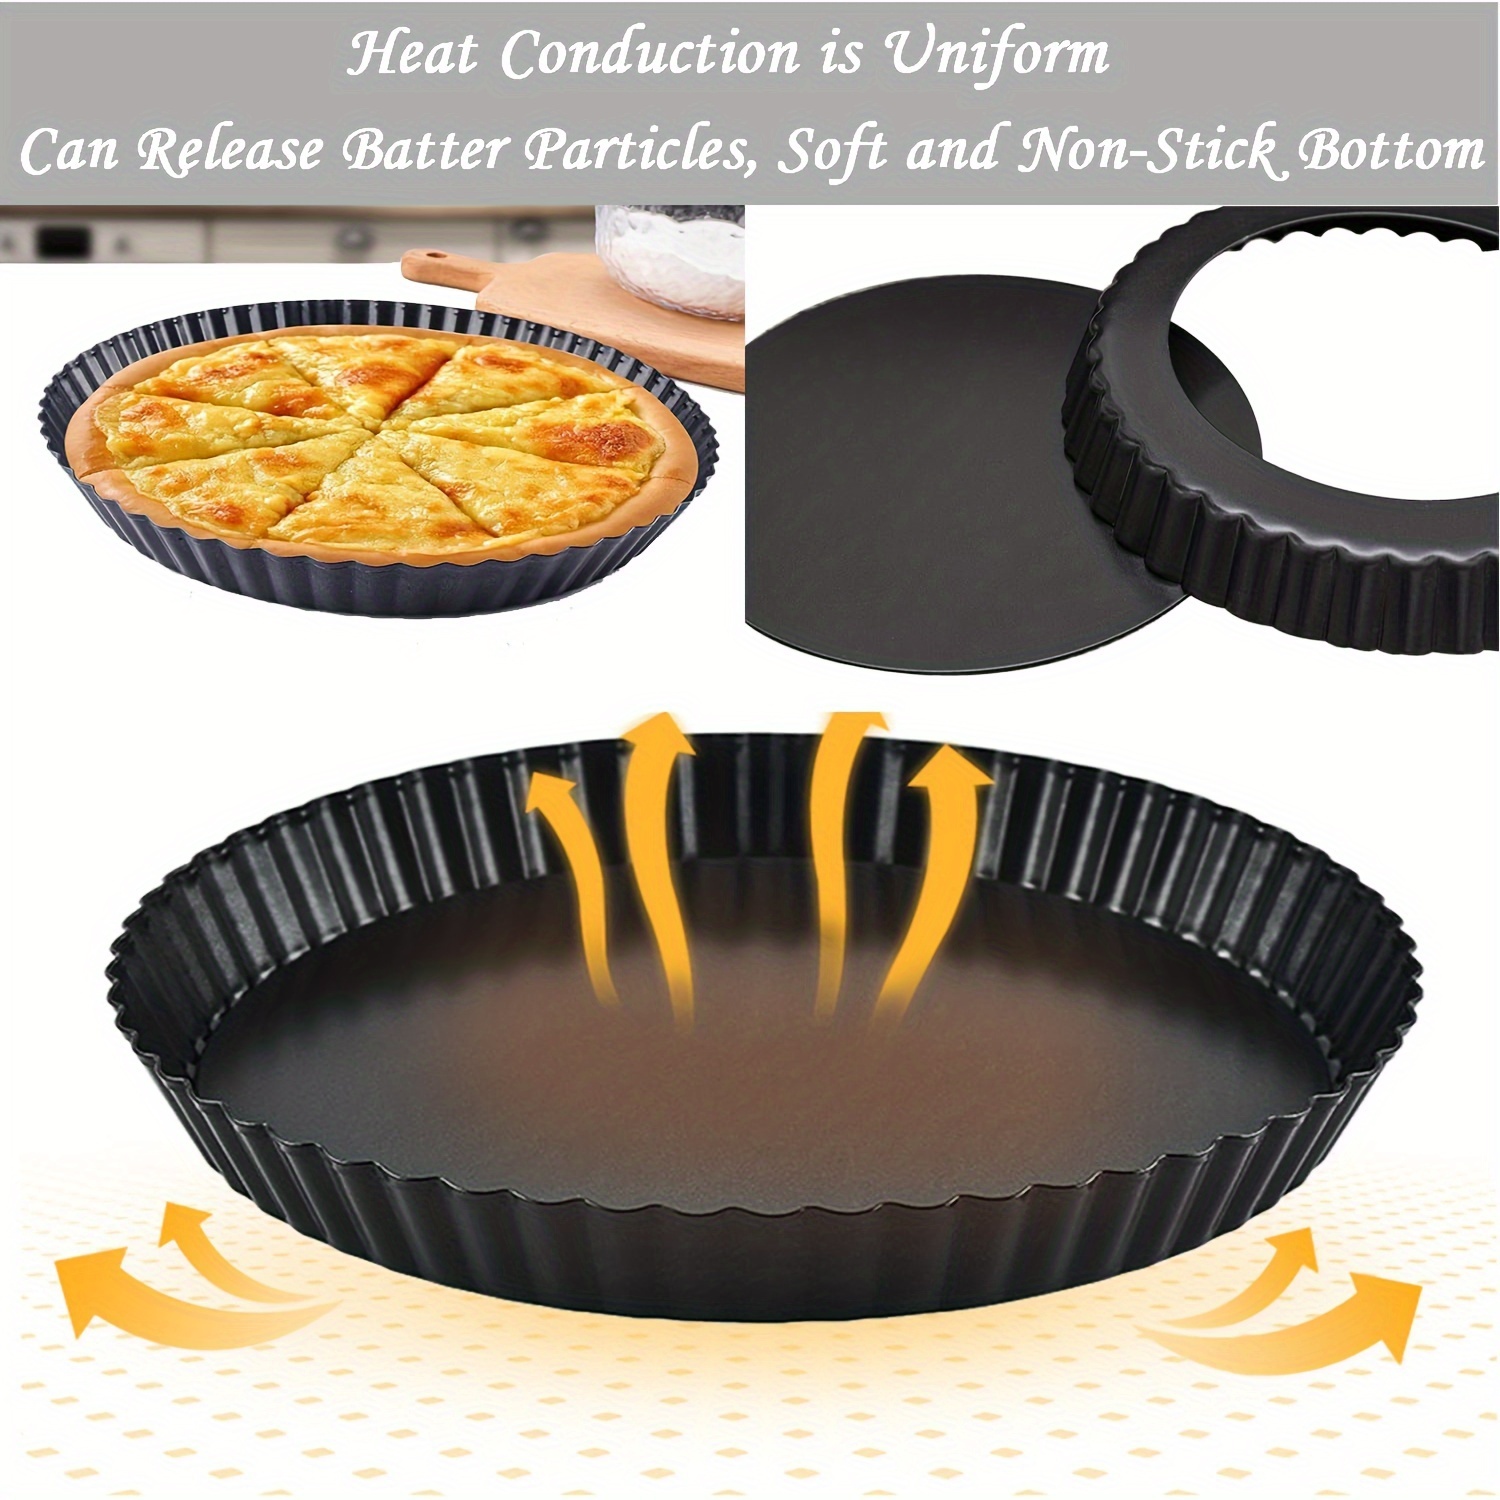 

4 Set, 8.6 Inch Pie Pie Pan With Removable Bottom Notches, Round Non-stick Pan For Baking Pizza Mousse Cakes, Christmas Desserts